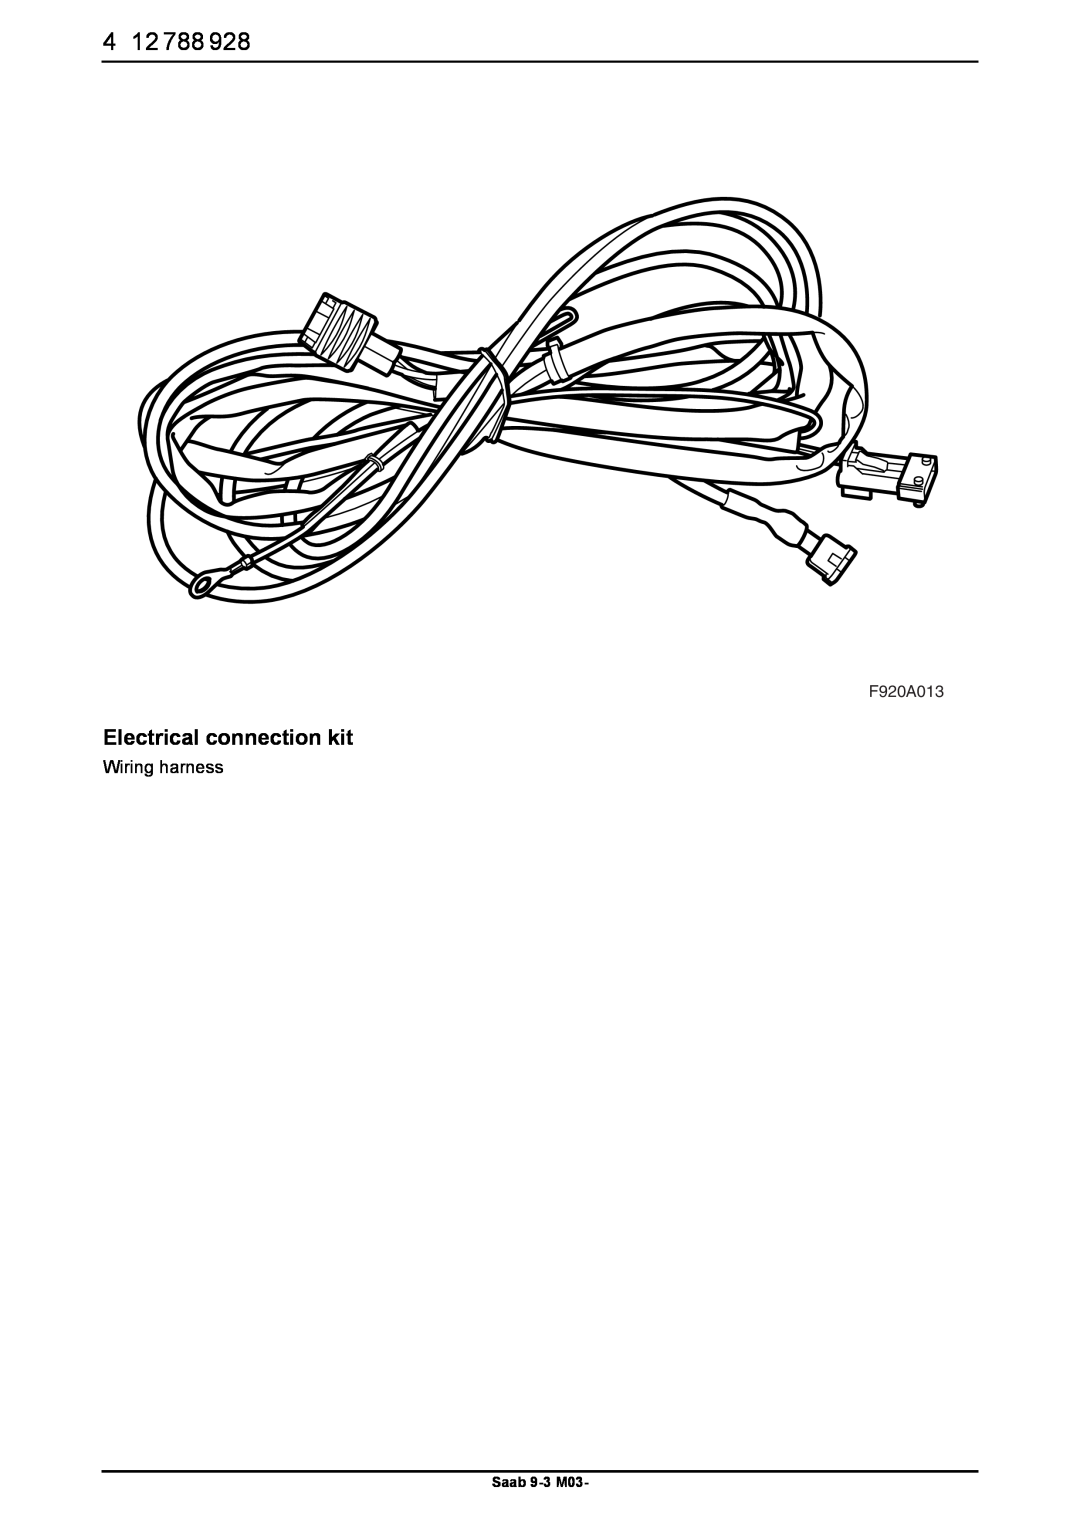 Saab 9-3 M03 installation instructions Electrical connection kit, Wiring harness, F920A013, Saab 9-3M03 